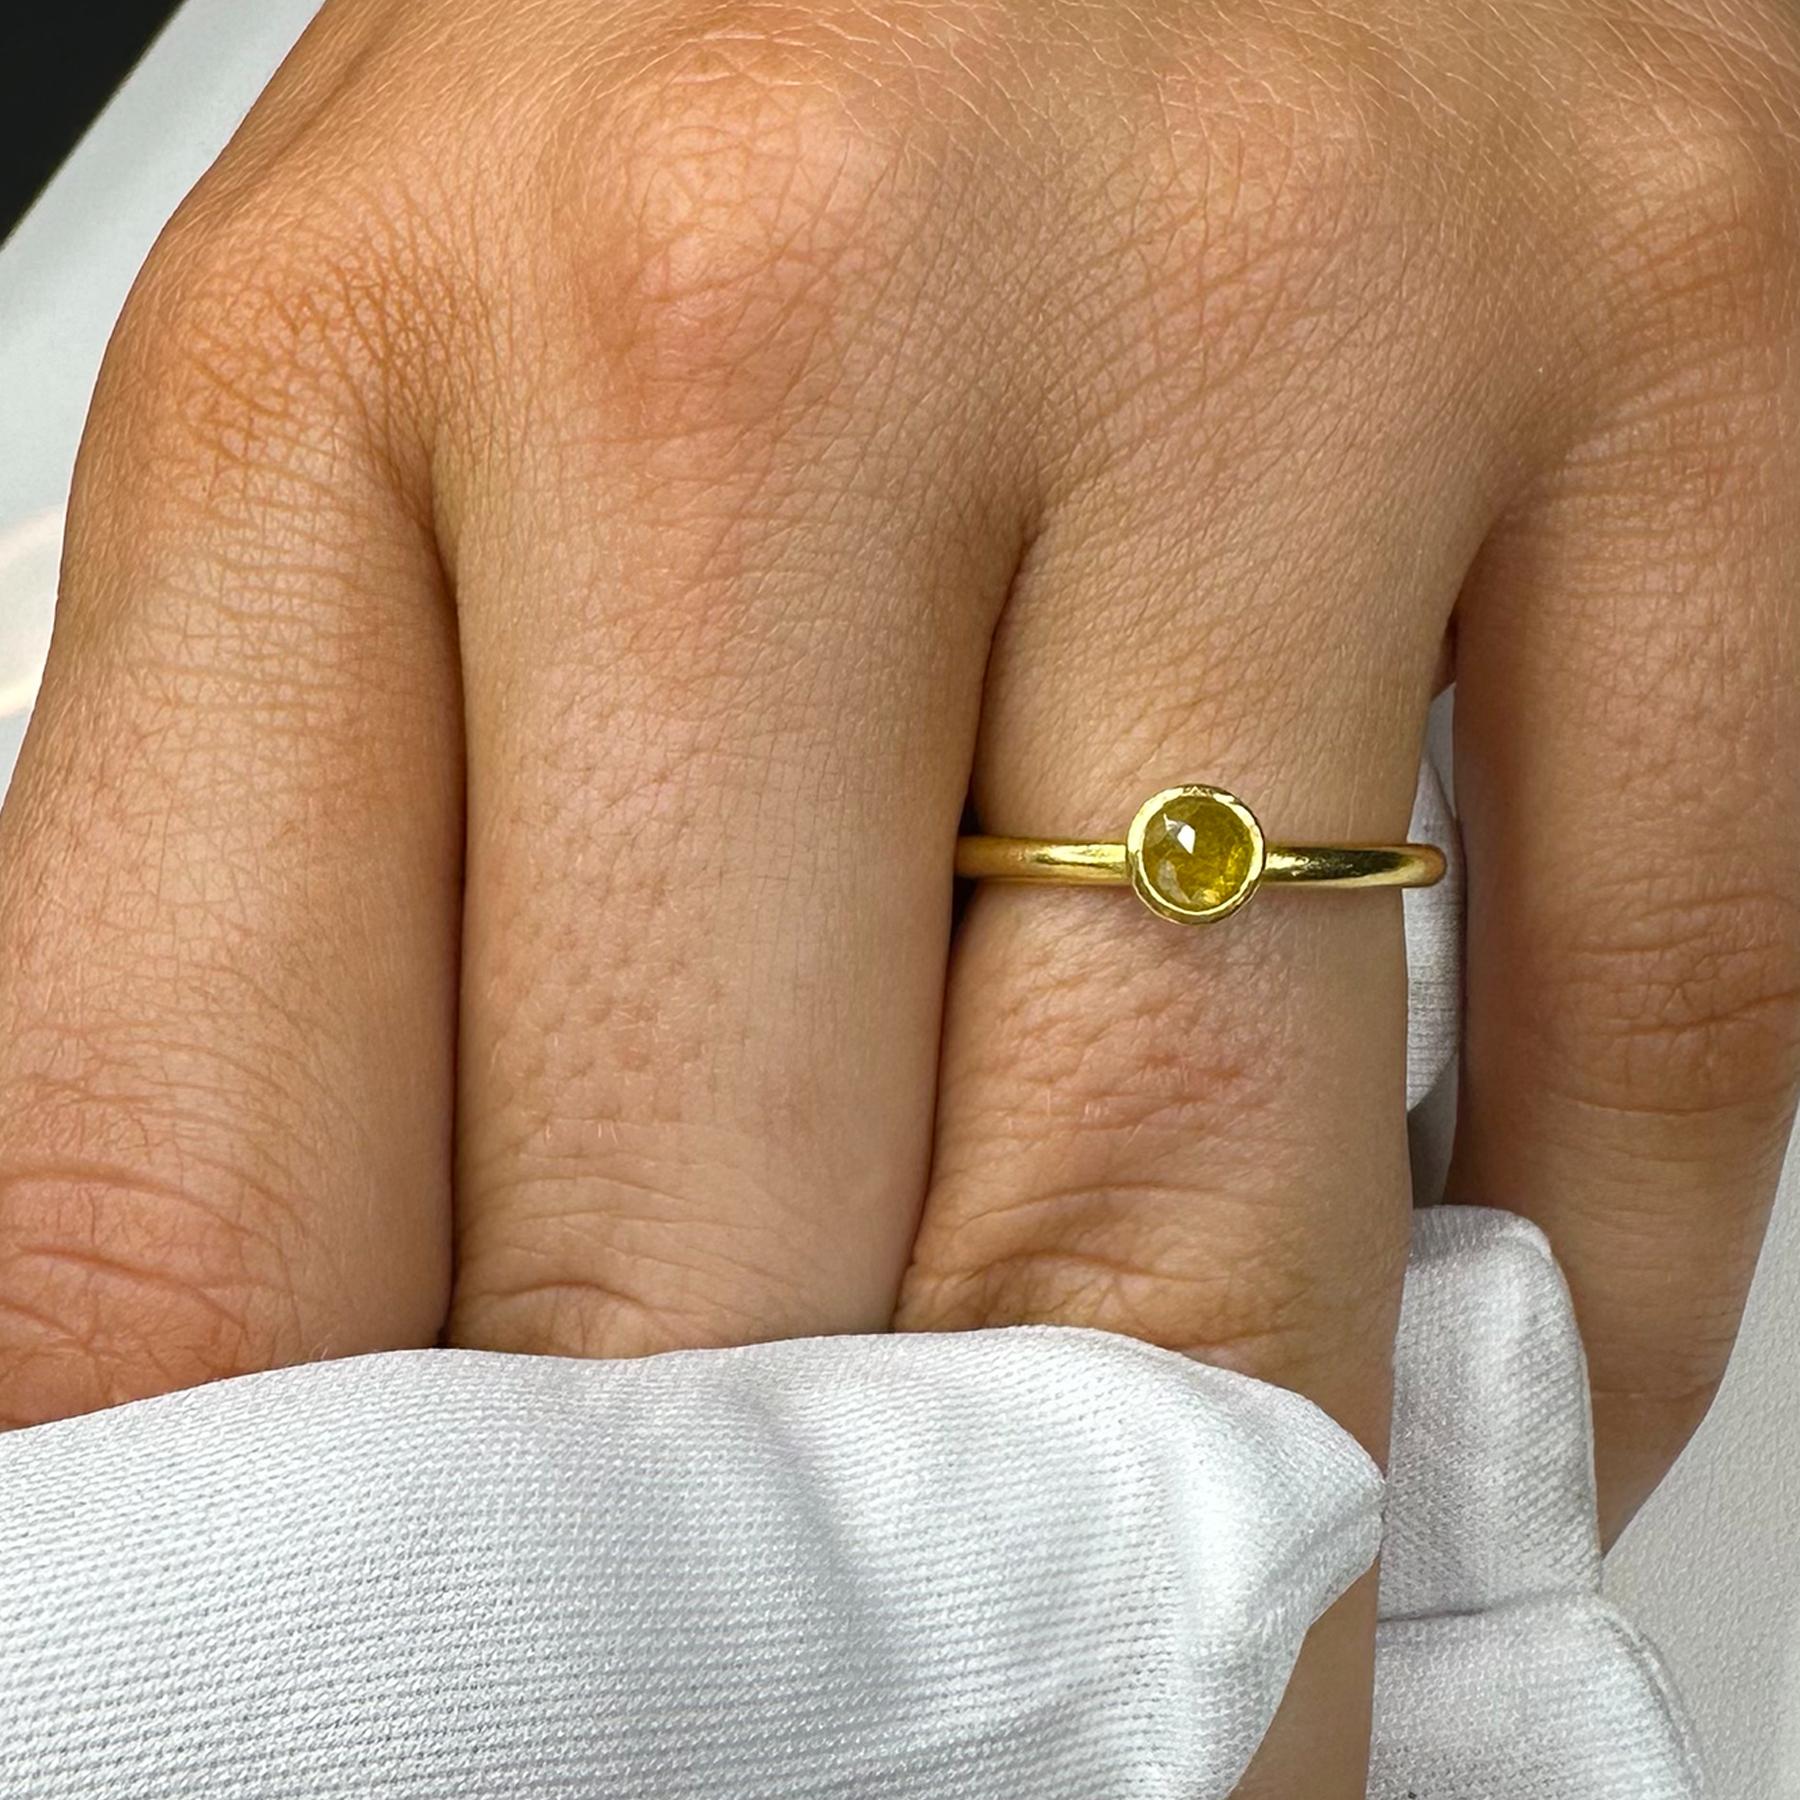 Rose Cut PHILIPPE SPENCER .40 Ct. Yellow Diamond in 22K and 20K Gold Solitaire Ring For Sale